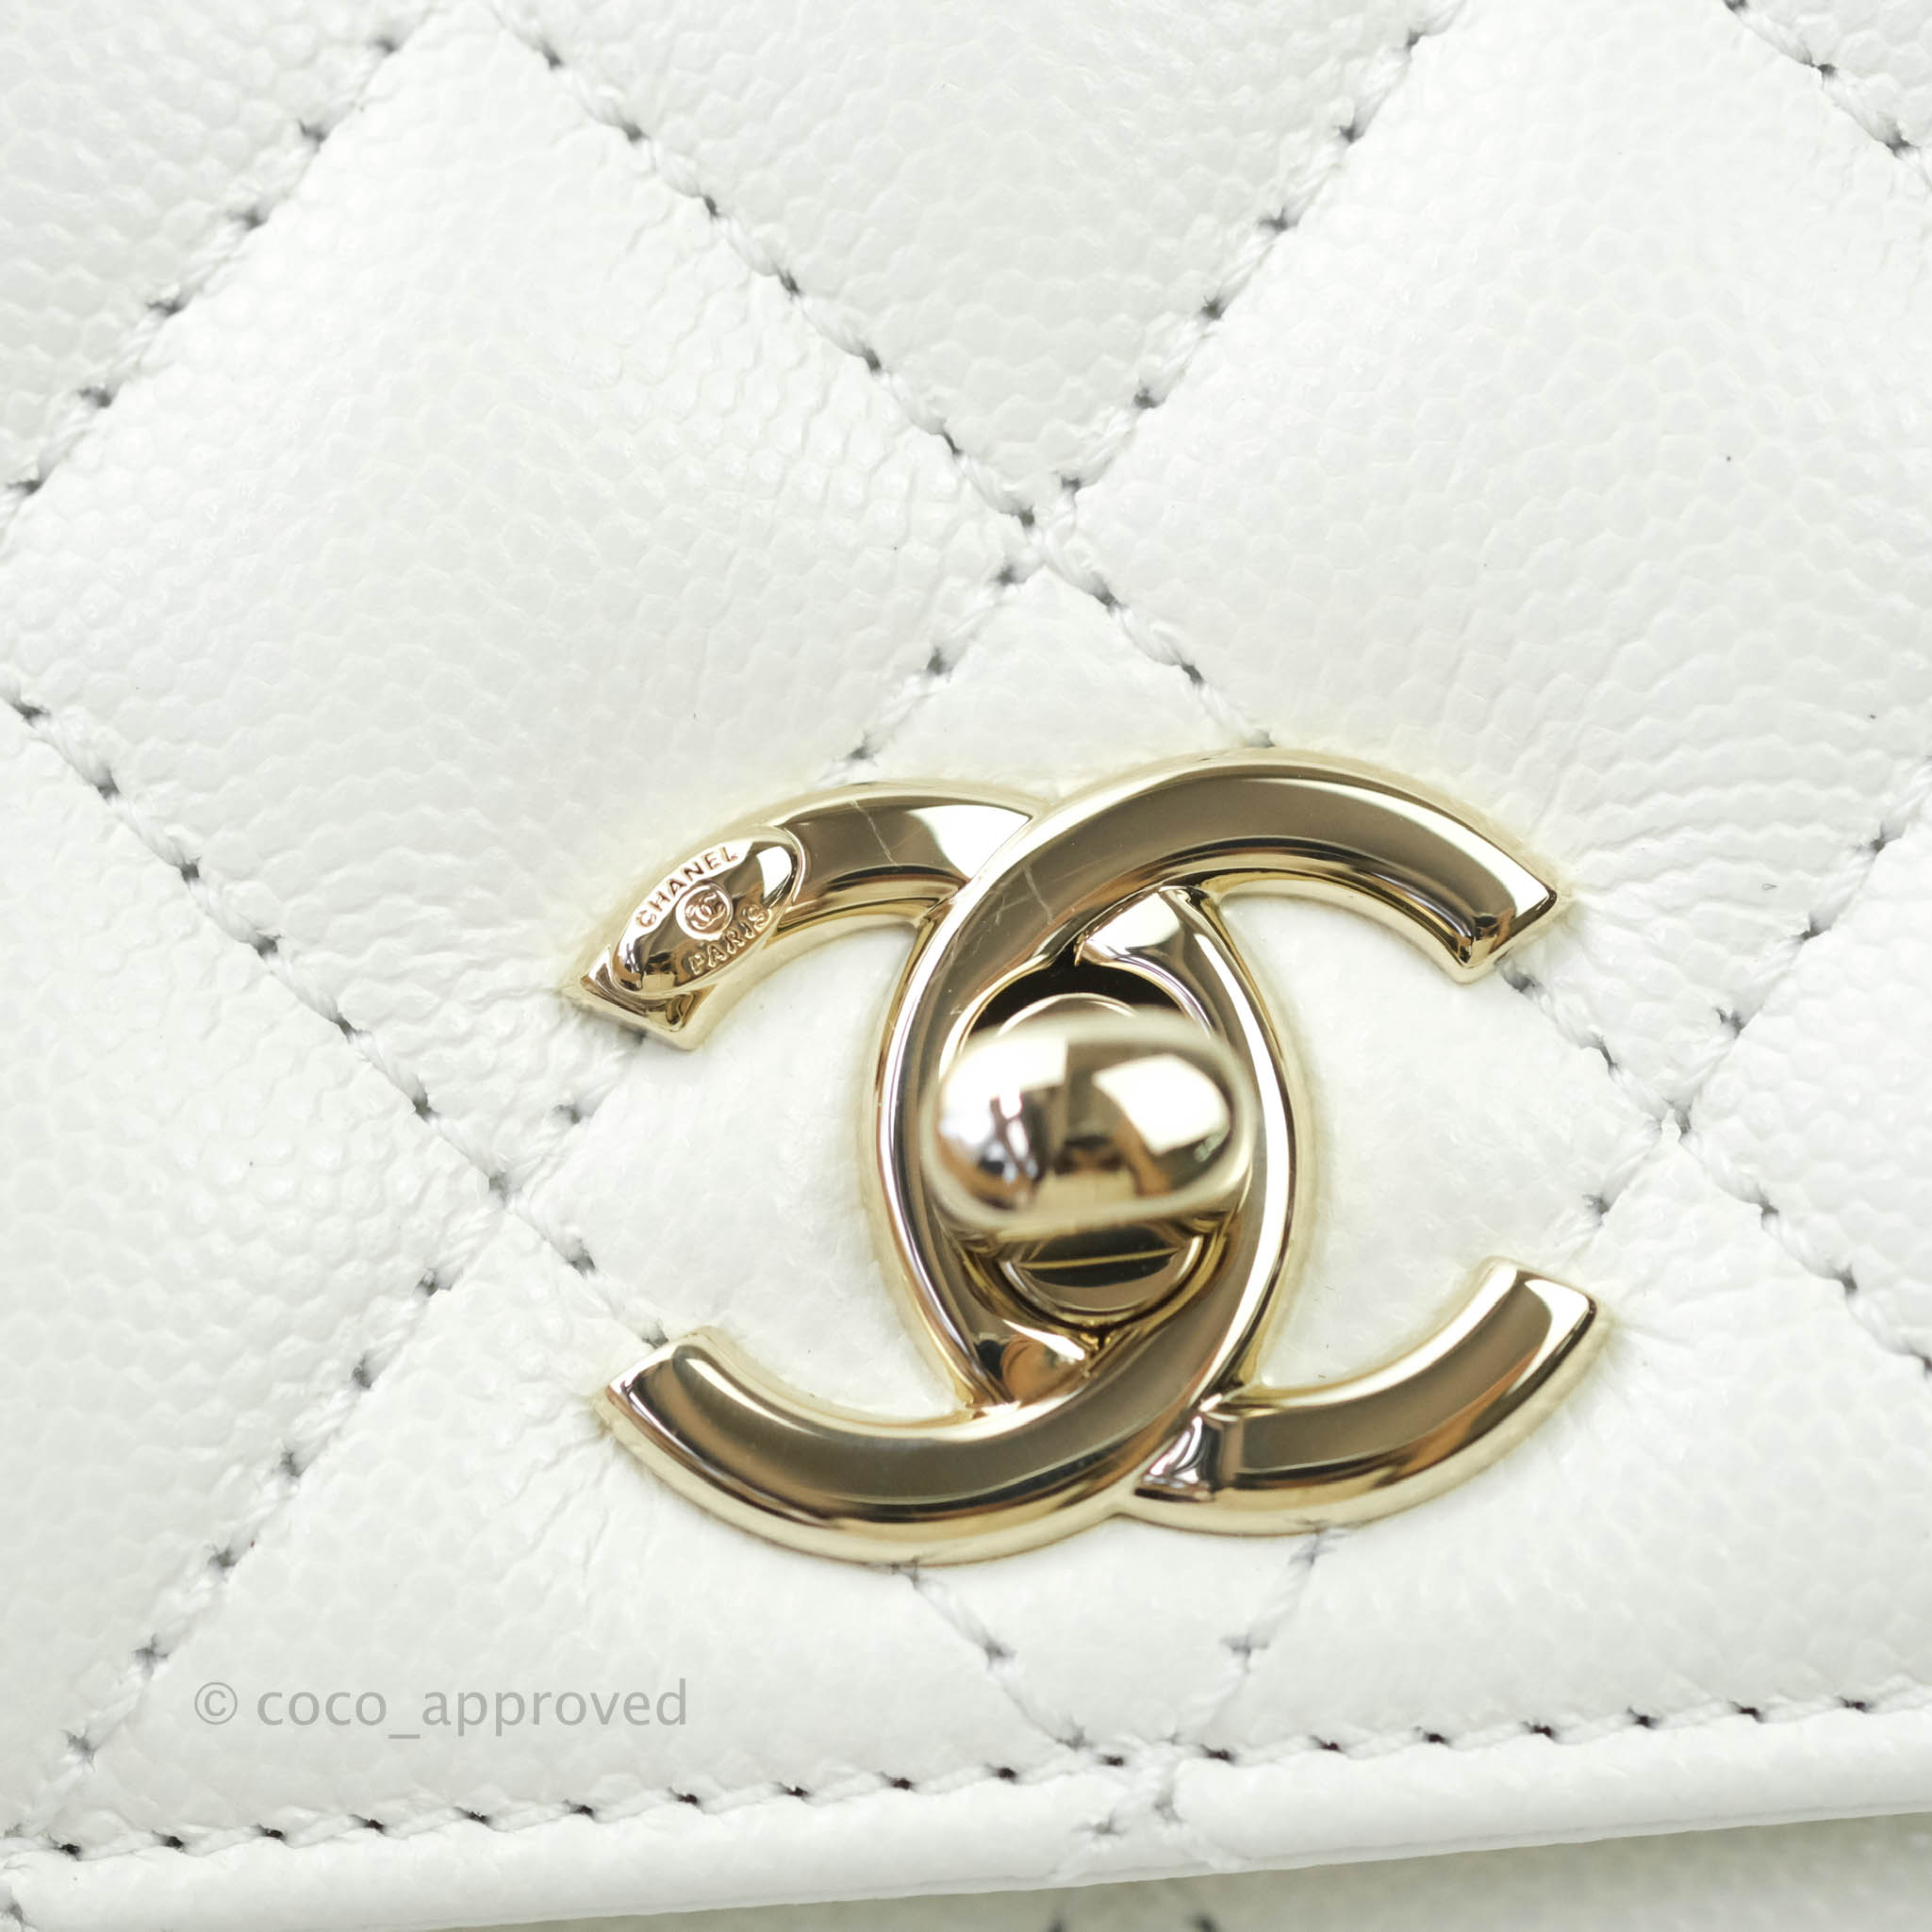 Chanel White Iridescent Quilted Grained Calfskin Extra Mini Flap Bag With  Top Handle Pale Gold Hardware, 2021 Available For Immediate Sale At  Sotheby's